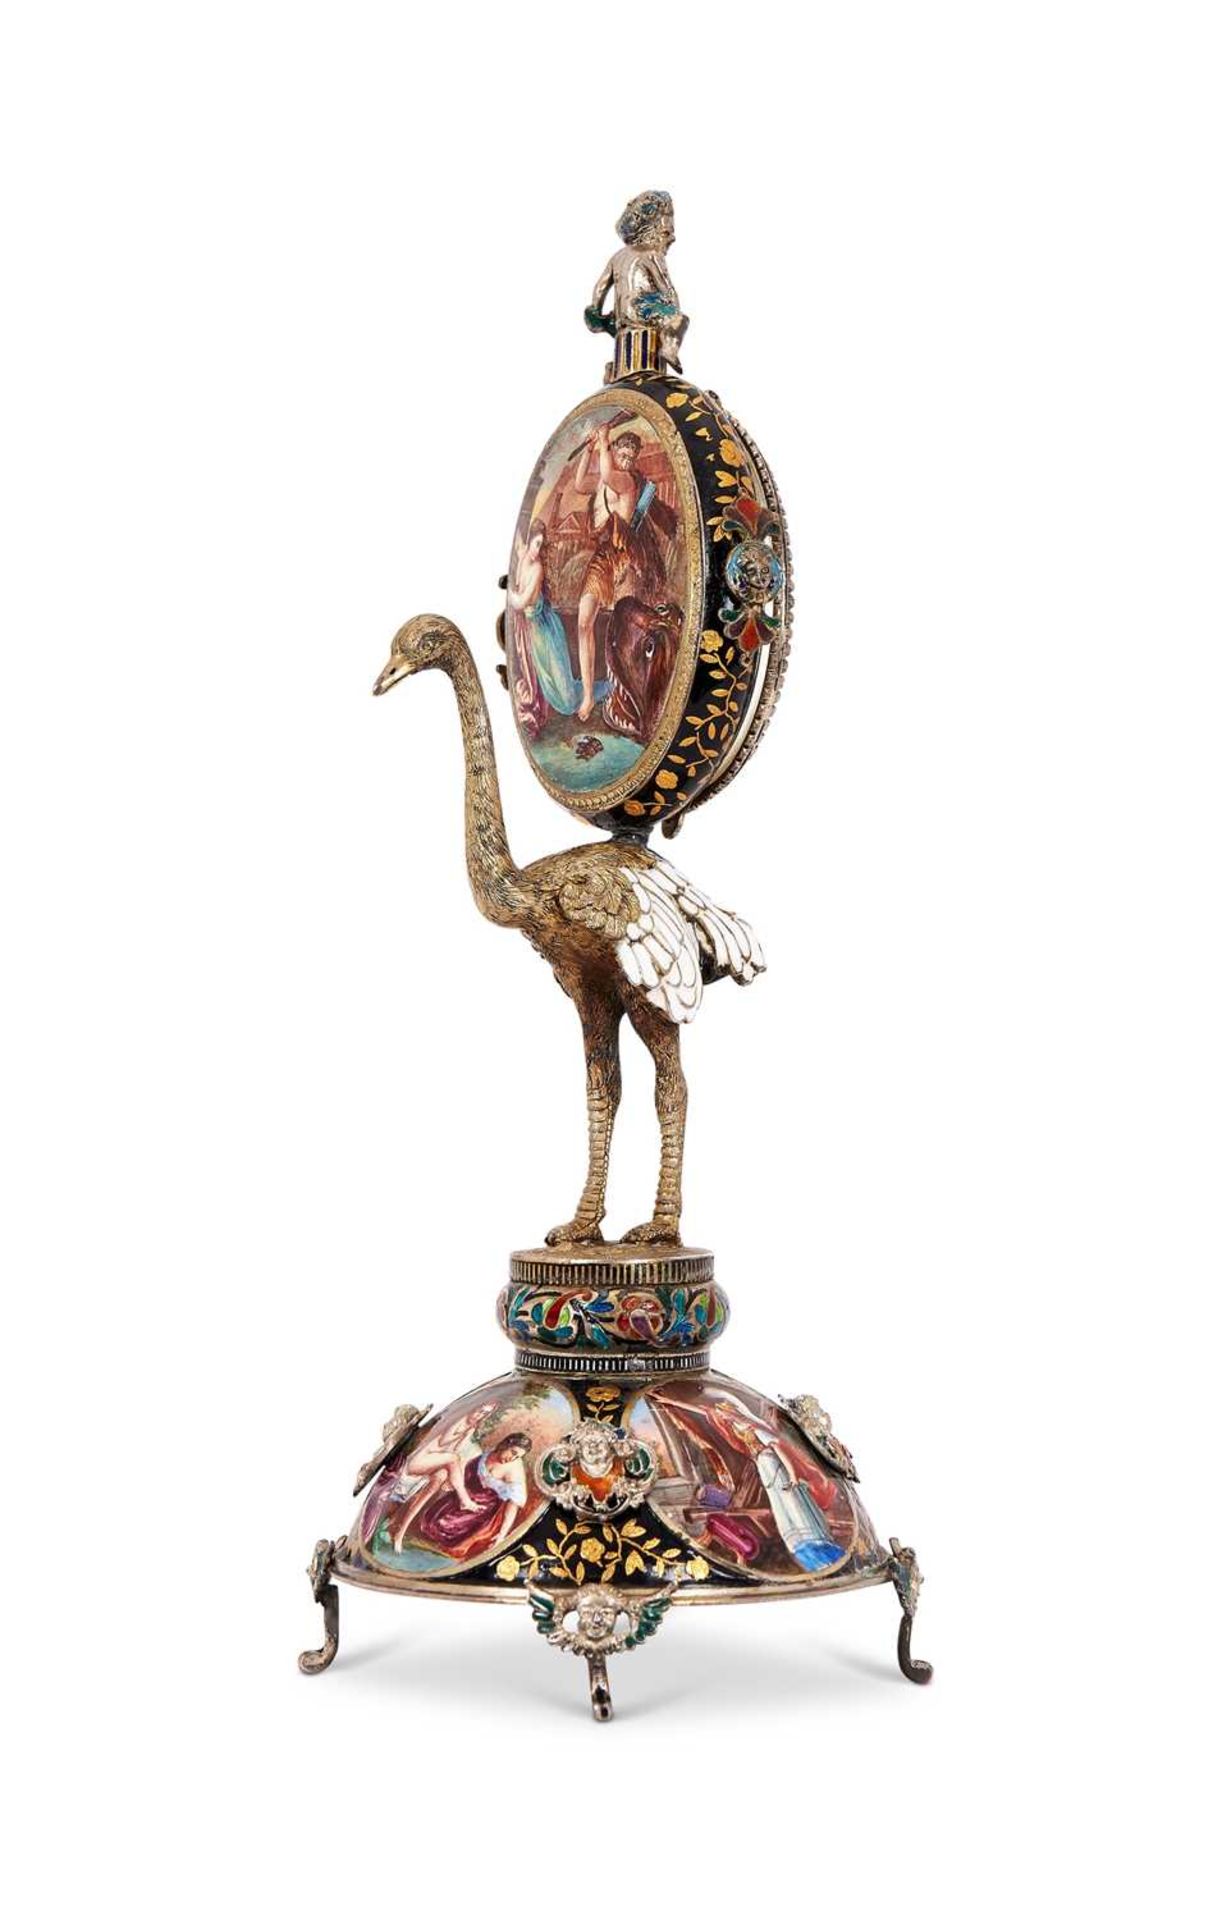 A FINE 19TH CENTURY VIENNESE ENAMEL AND SILVER TABLE CLOCK IN THE MANNER OF HERMANN RATZERSDORFER